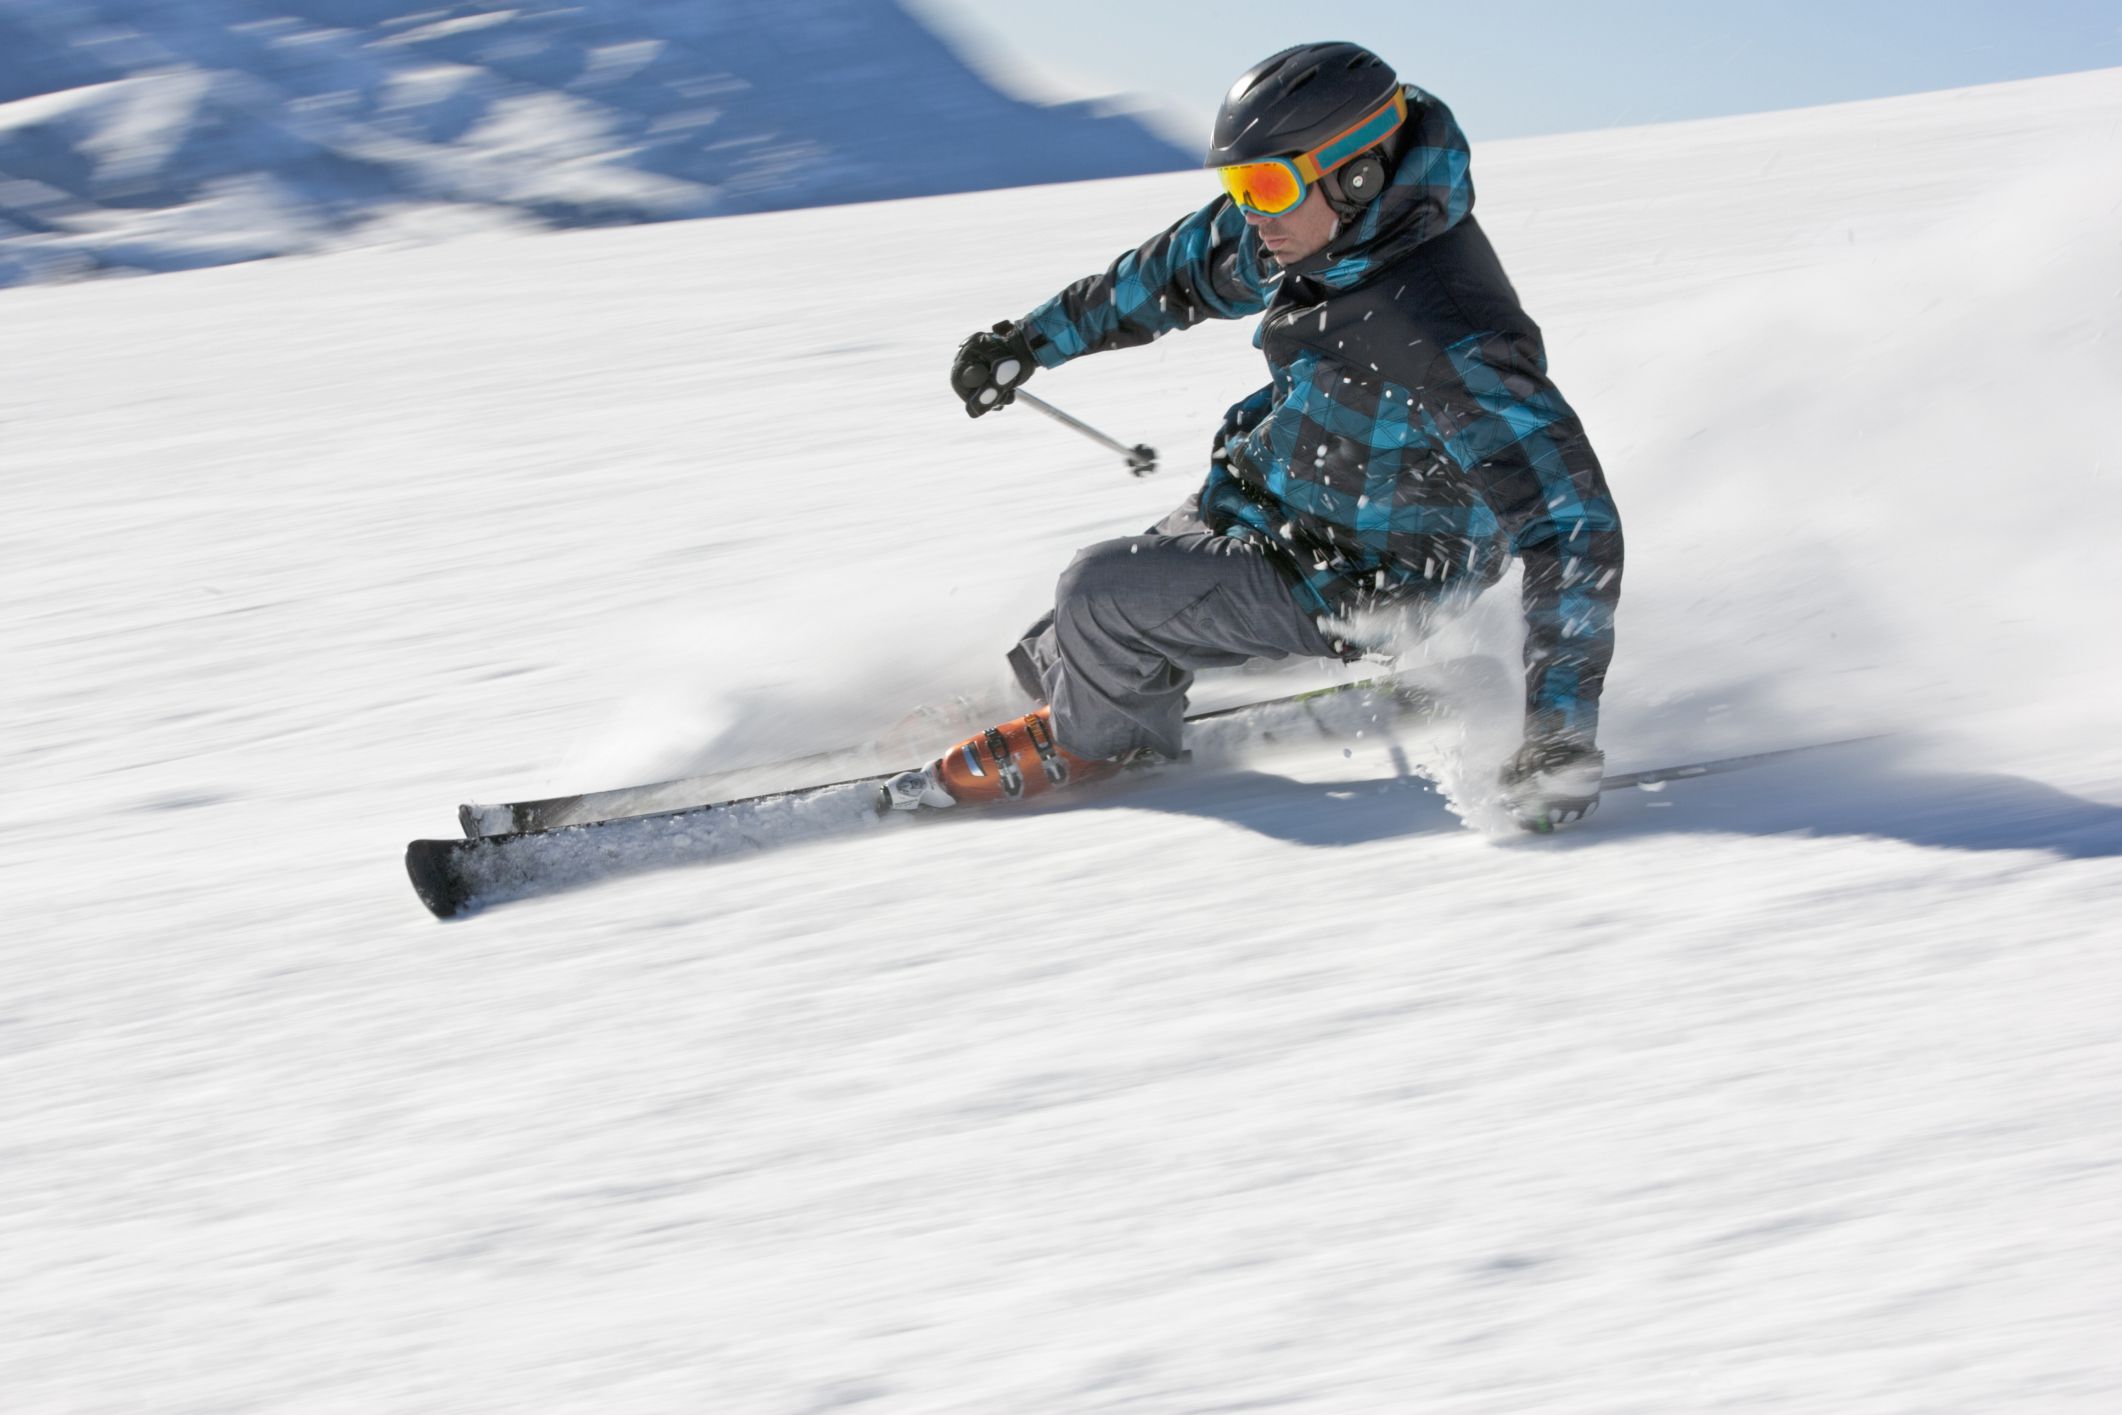 What's the Average Speed of a Downhill Skier?